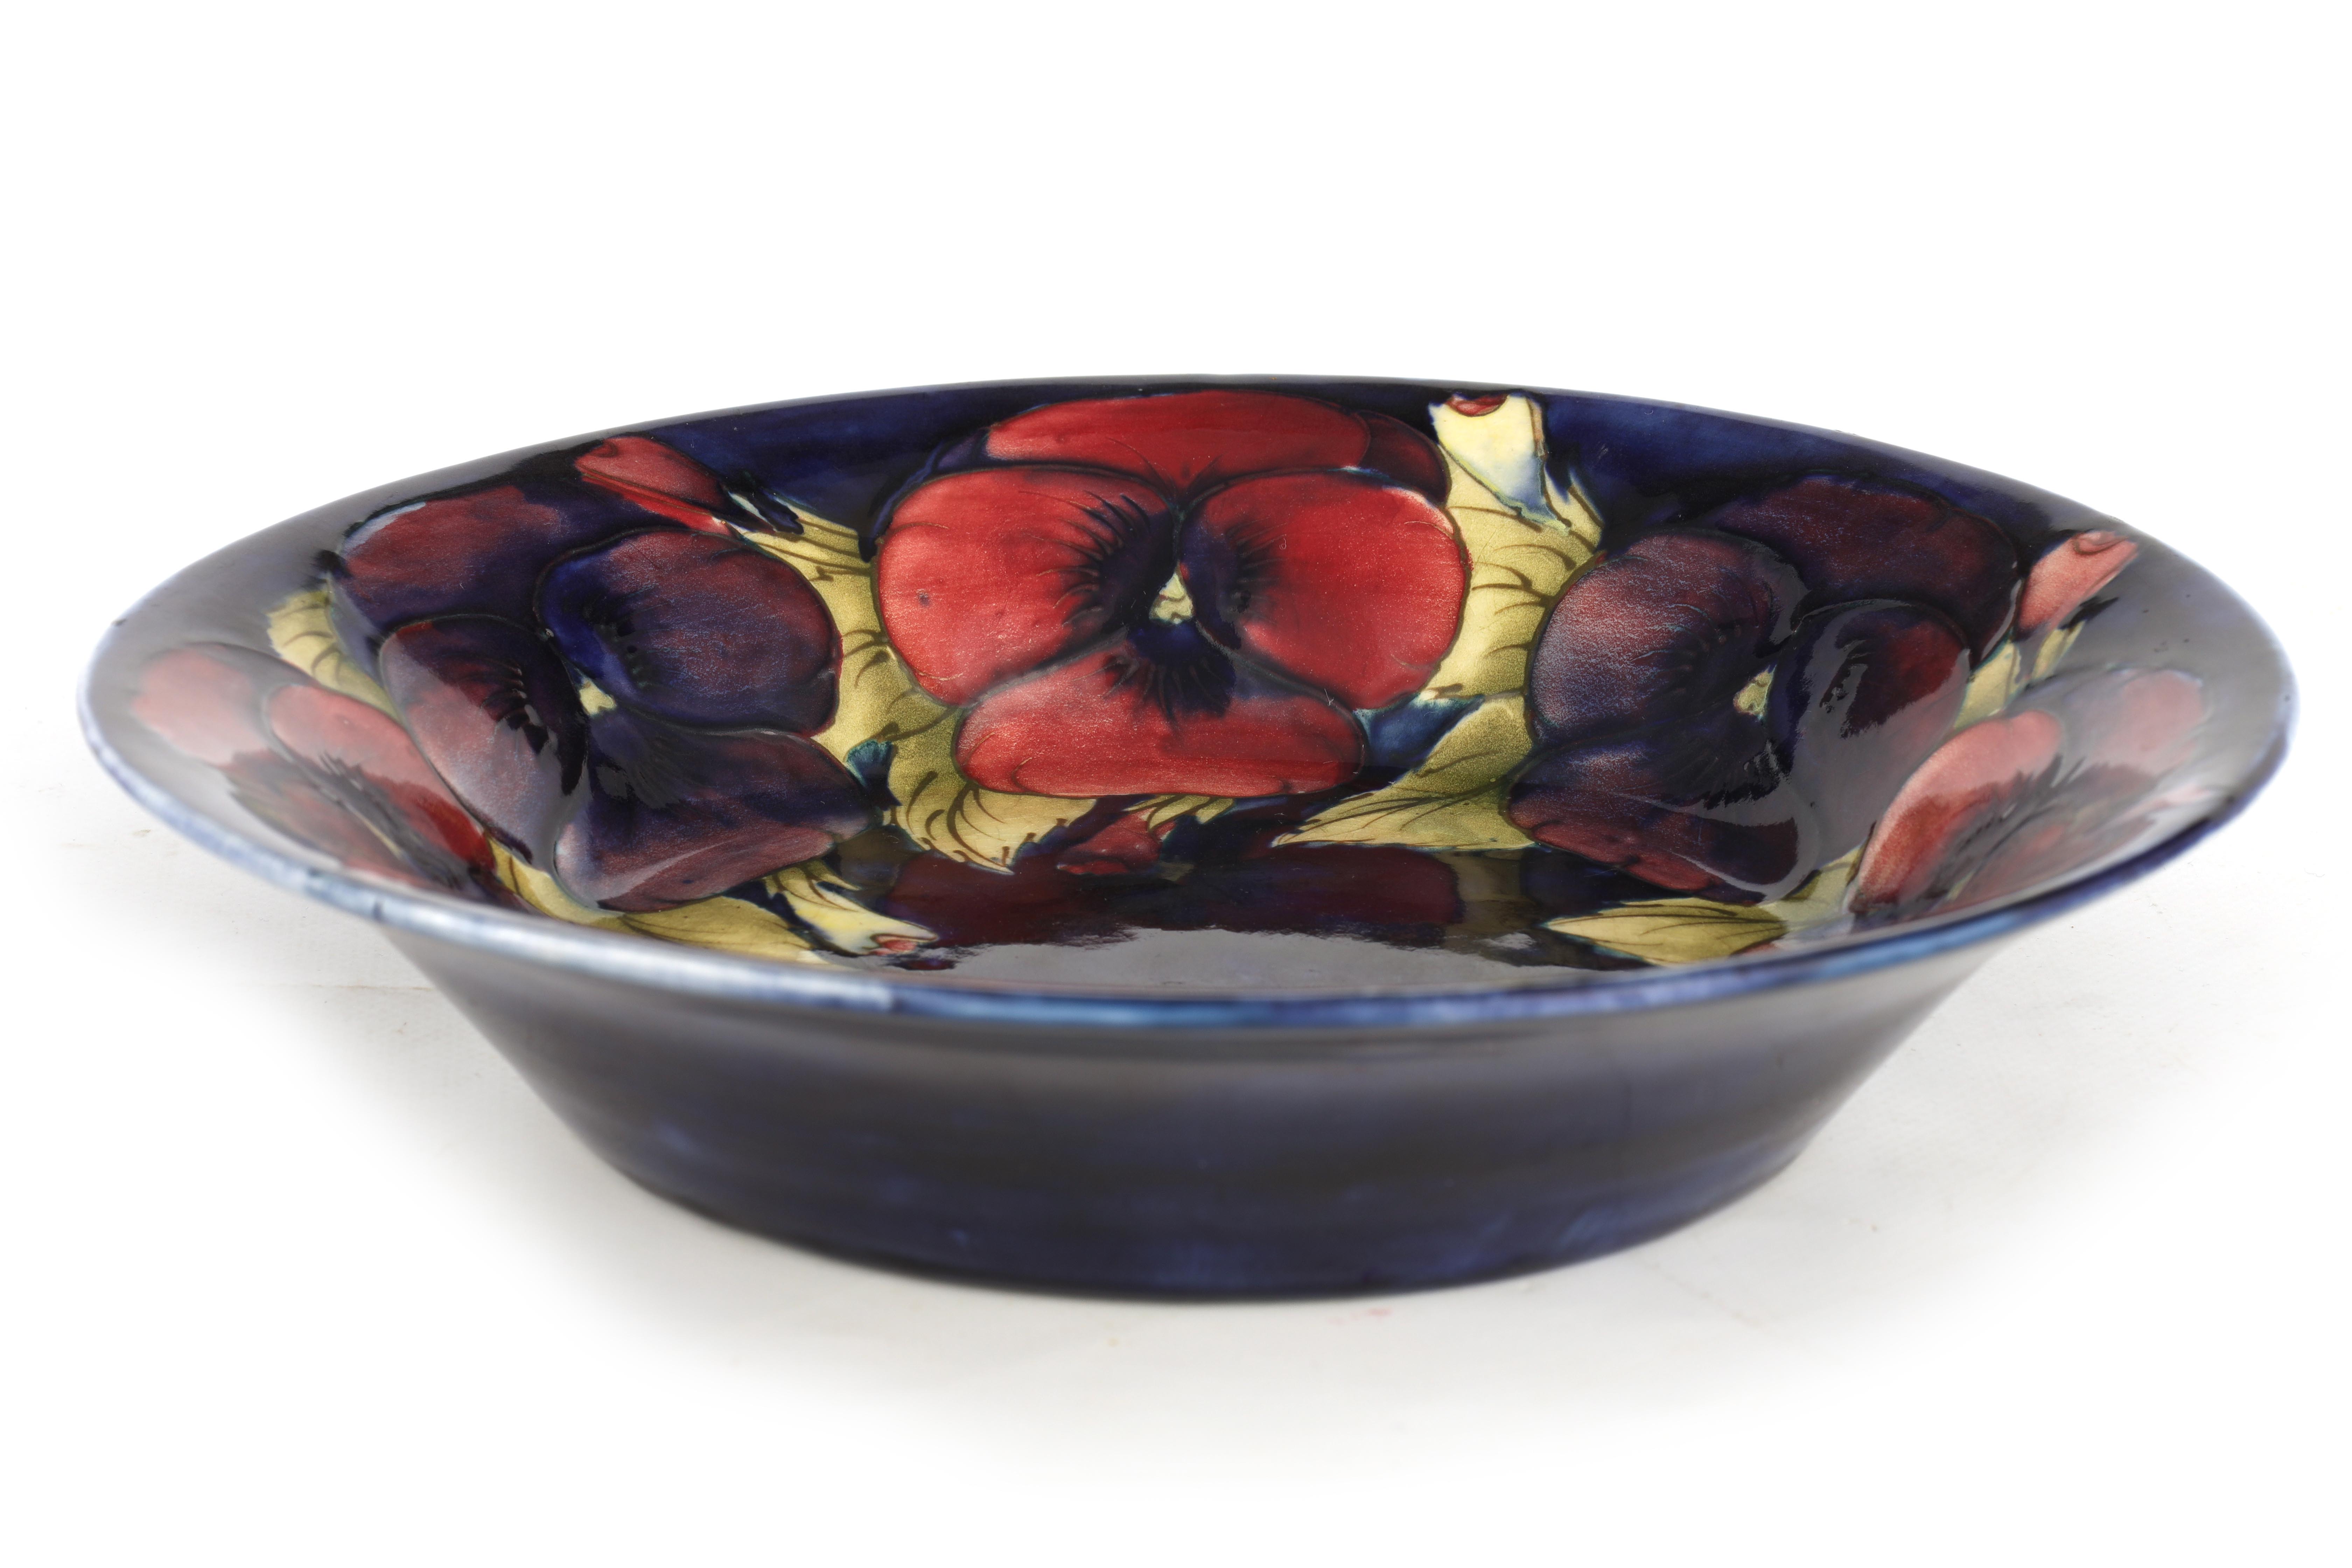 A 1930S/40S MOORCROFT LARGE SHALLOW DISH WITH EVERTED RIM decorated in the big pansy pattern on a